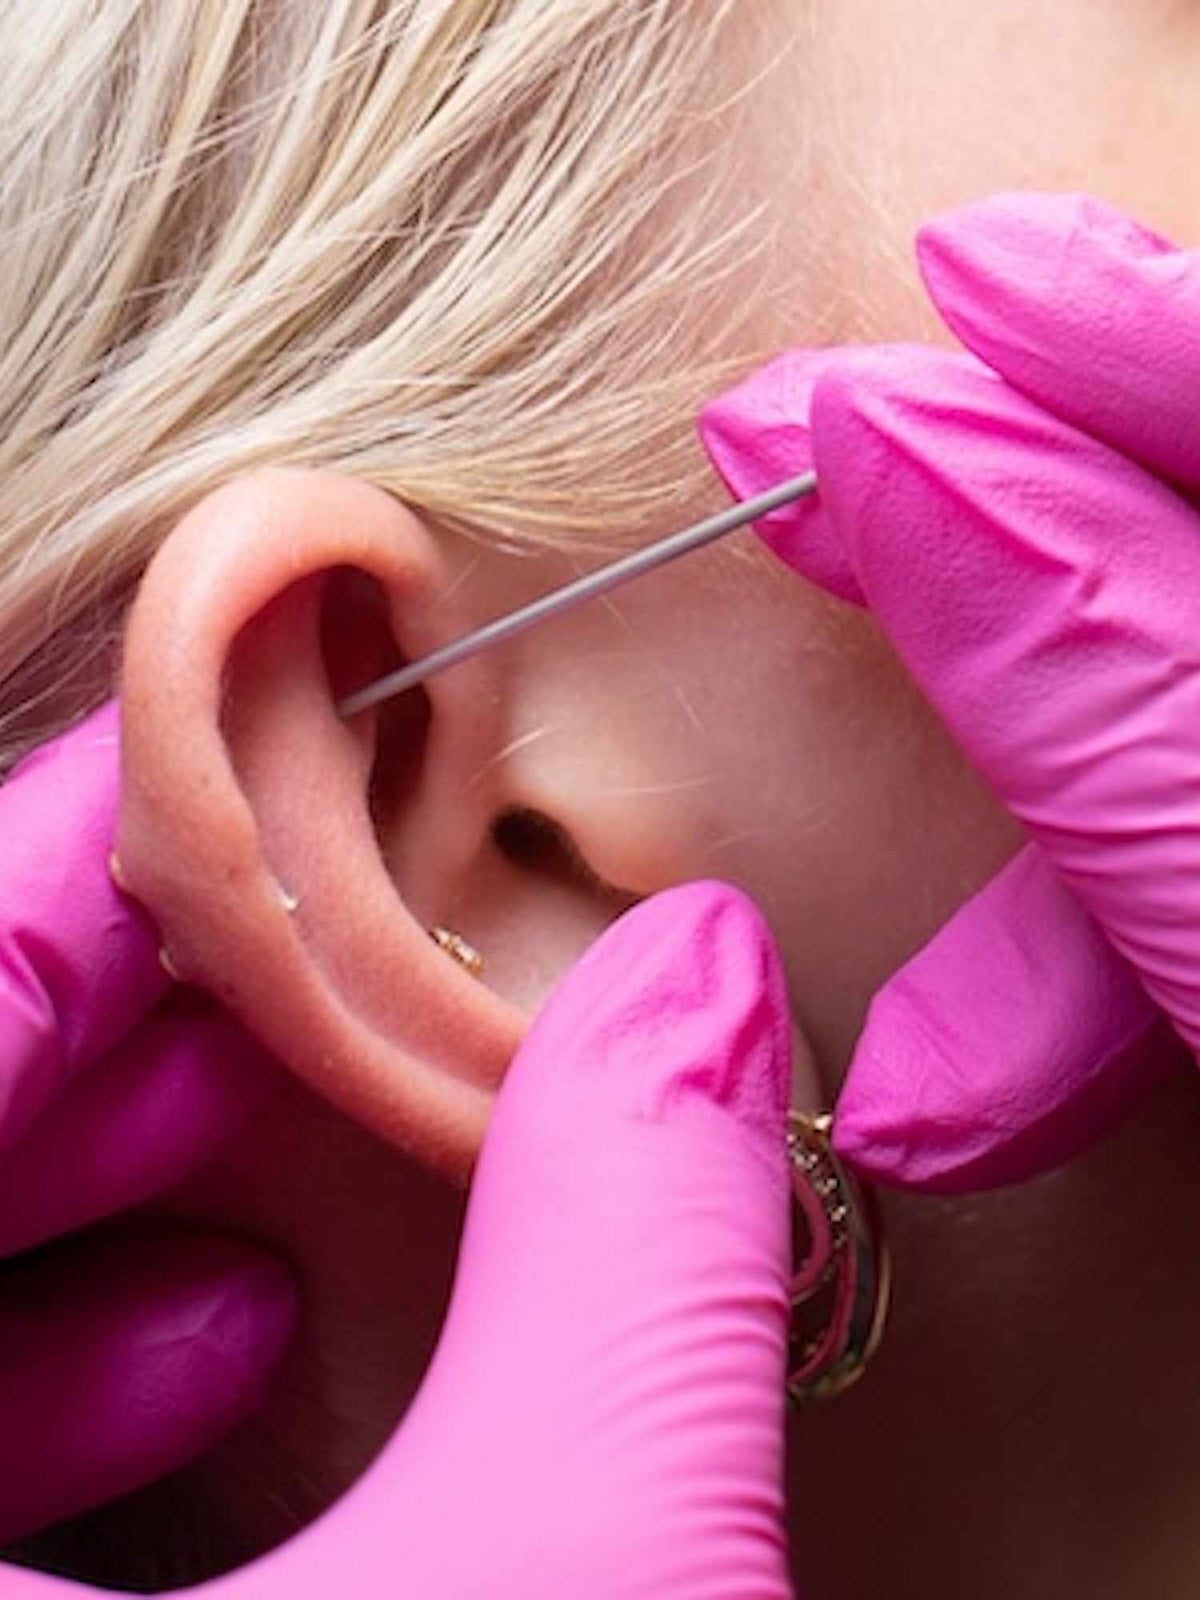 ear cartilage piercing with pink gloves